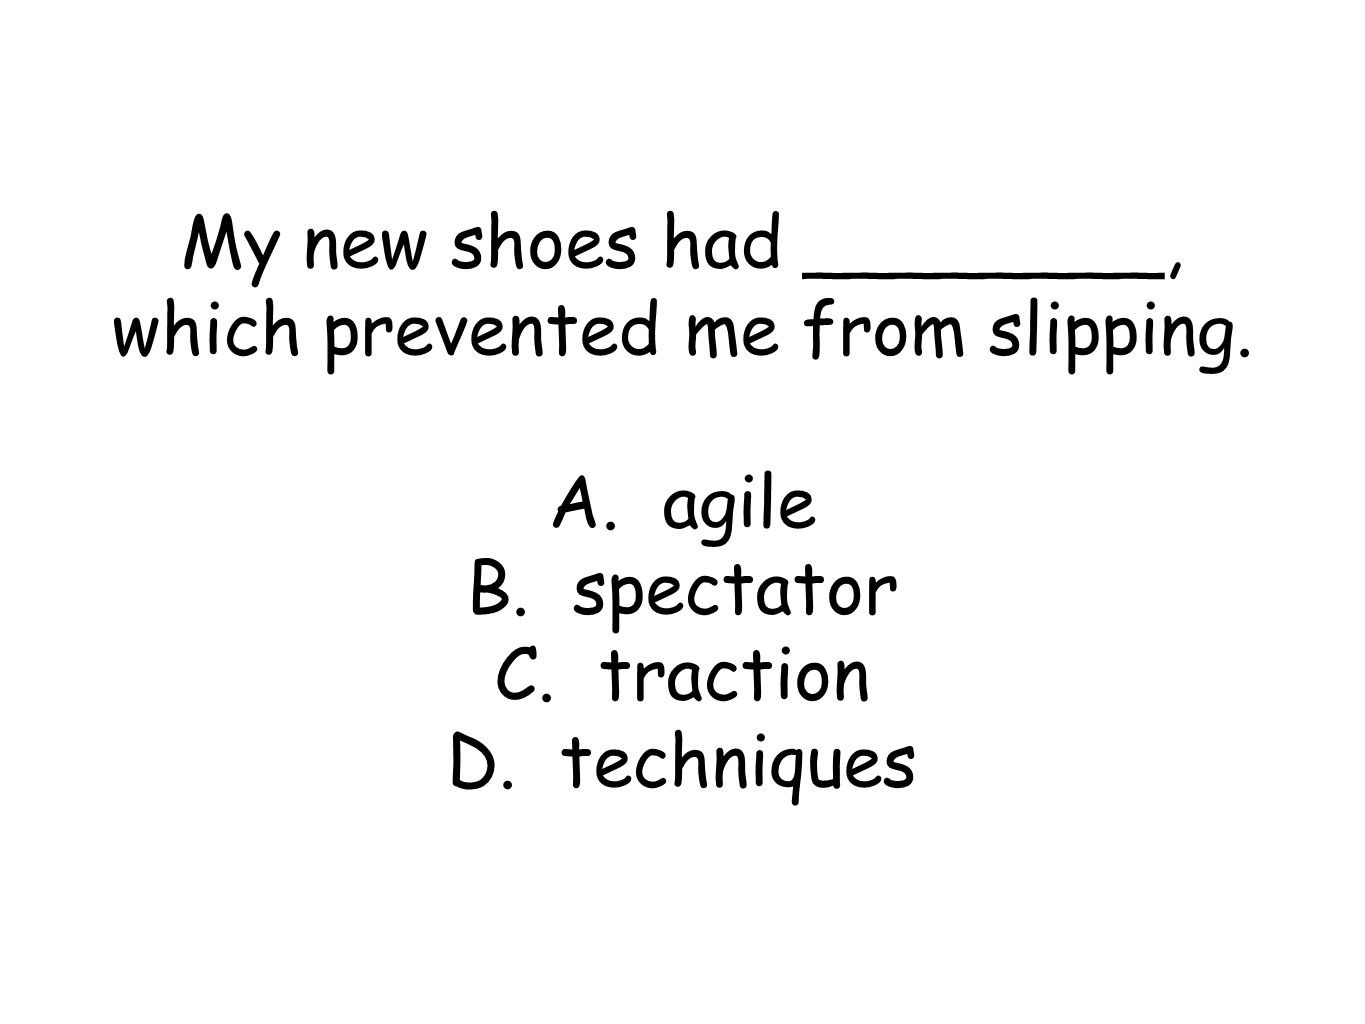 My new shoes had ________, which prevented me from slipping.